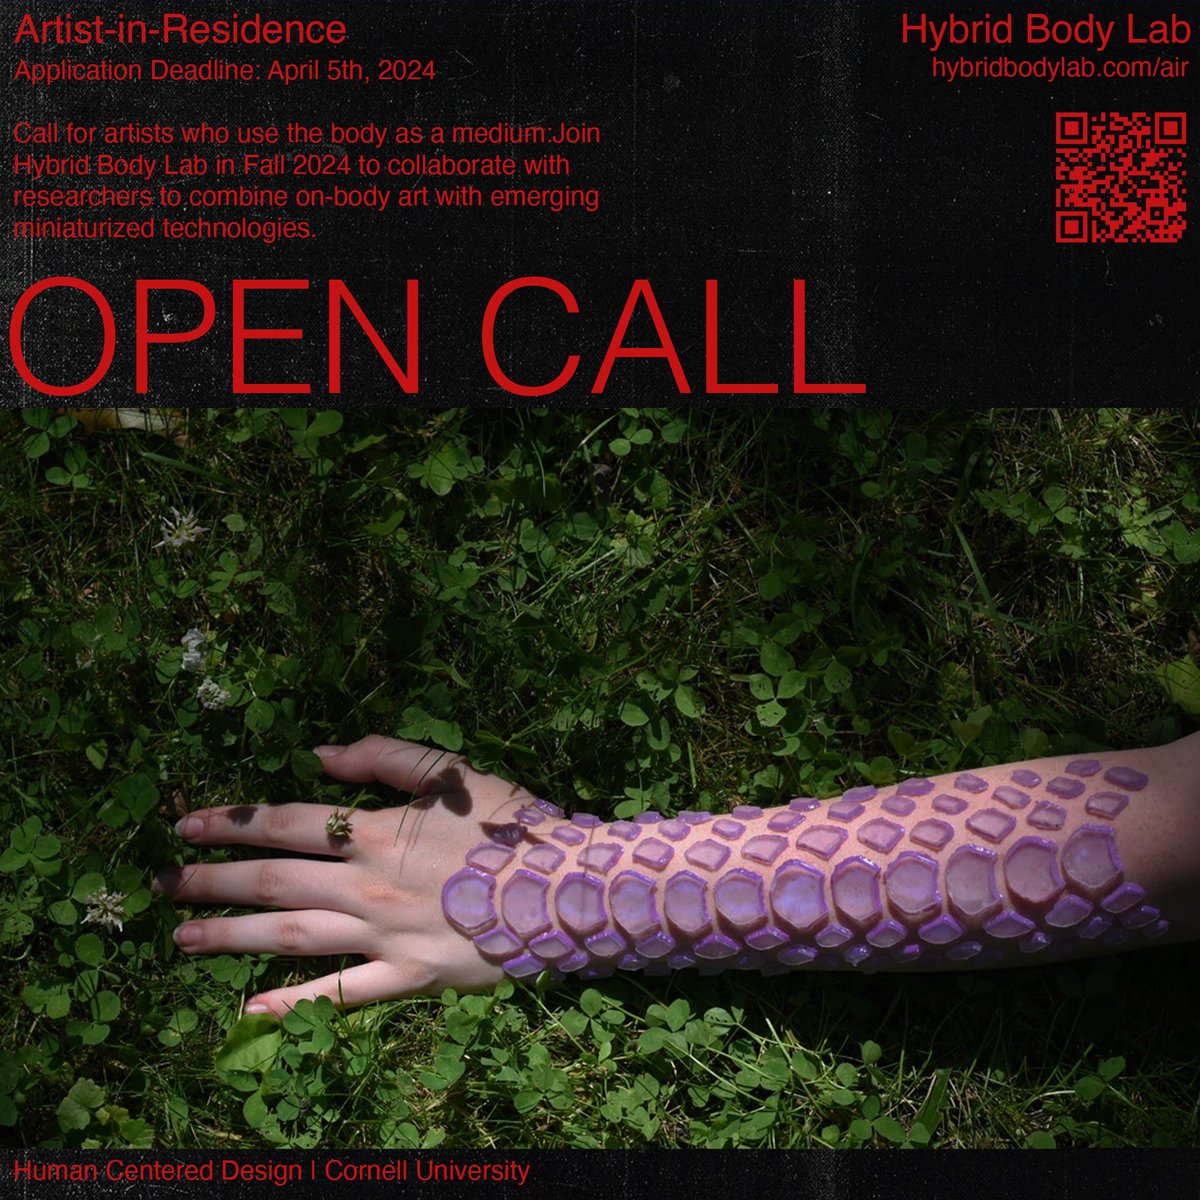 Application for the 2024 Hybrid Body Lab Artist-in-Residence is now open: hybridbody.human.cornell.edu/air